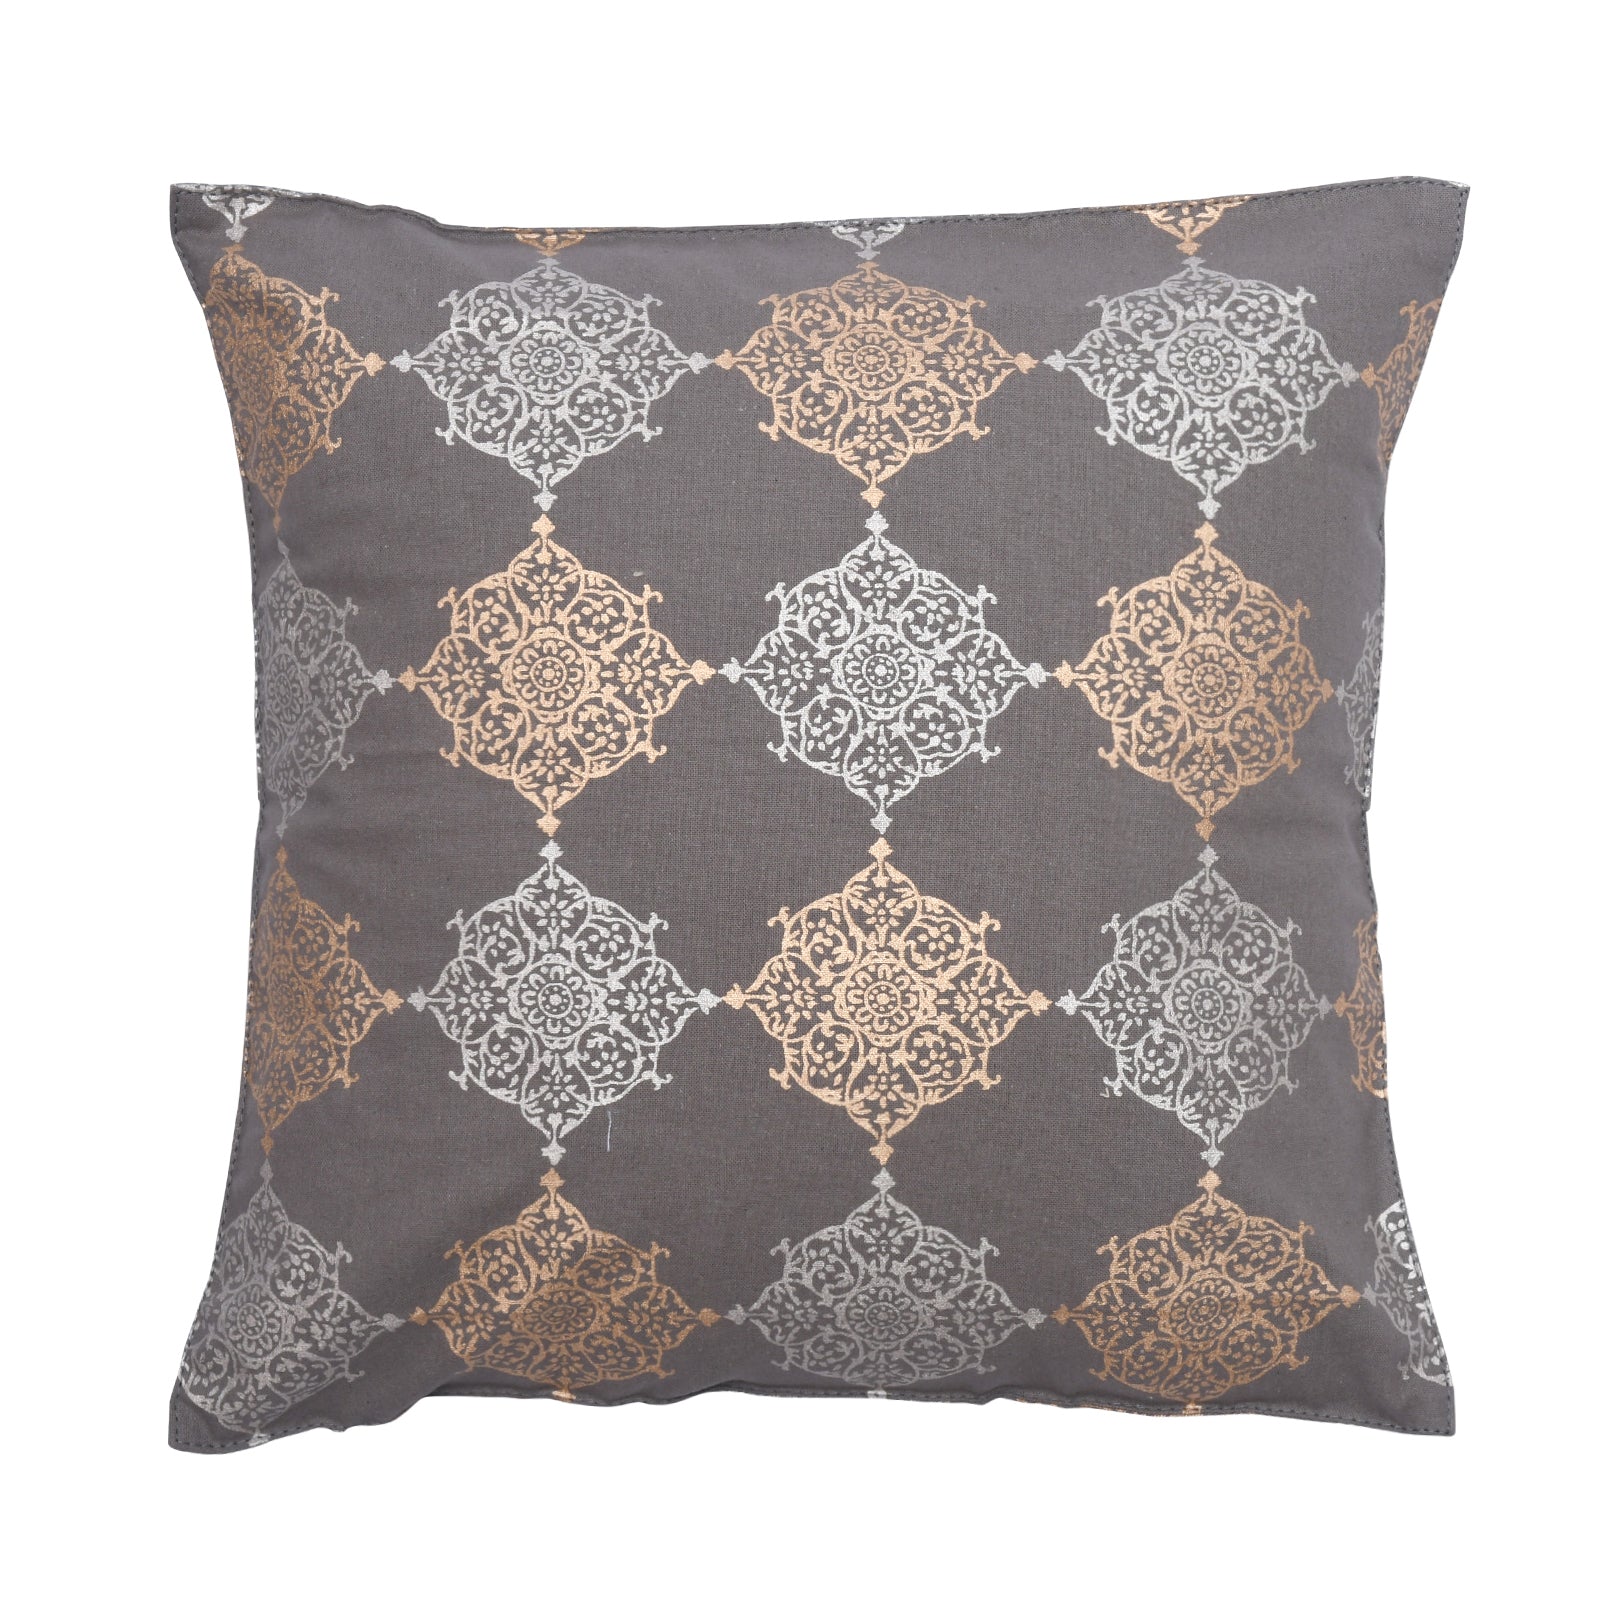 Cushion Cover - Suveille Midnight